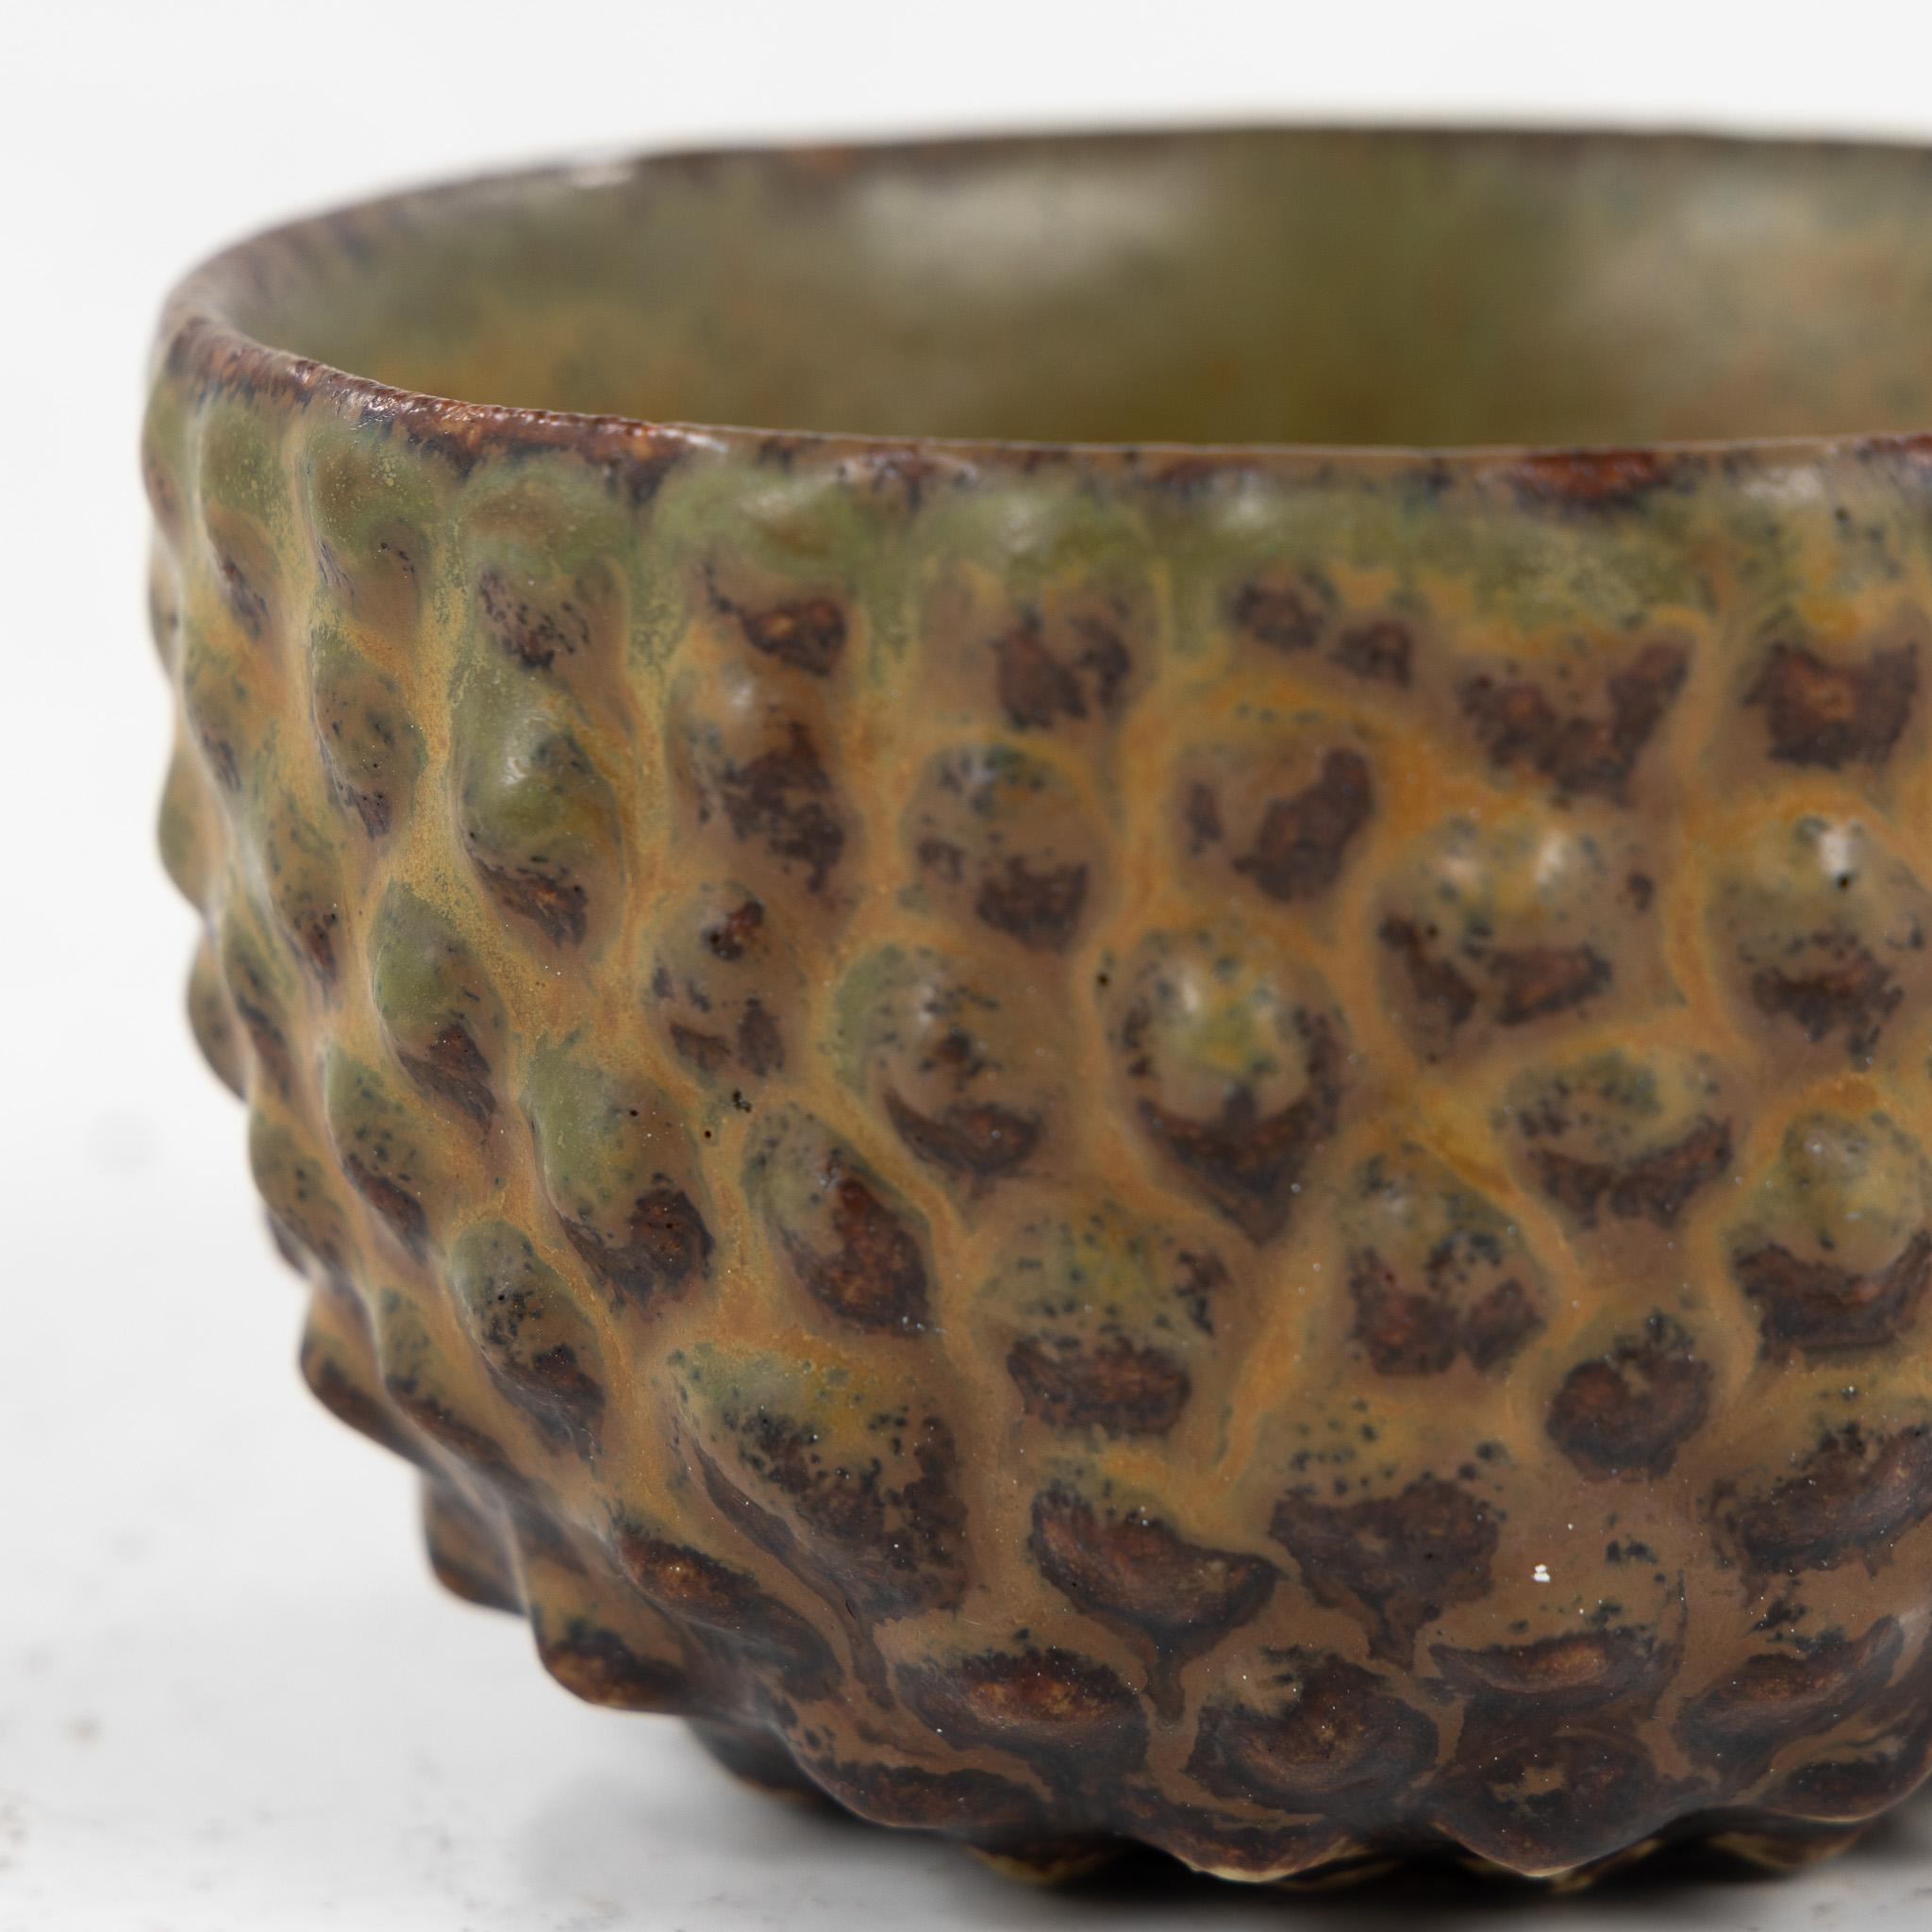 Bowl in glazed stoneware. Designed in 1944, executed in 1945. Model 20566. Signed. Axel Salto for Royal Copenhagen.